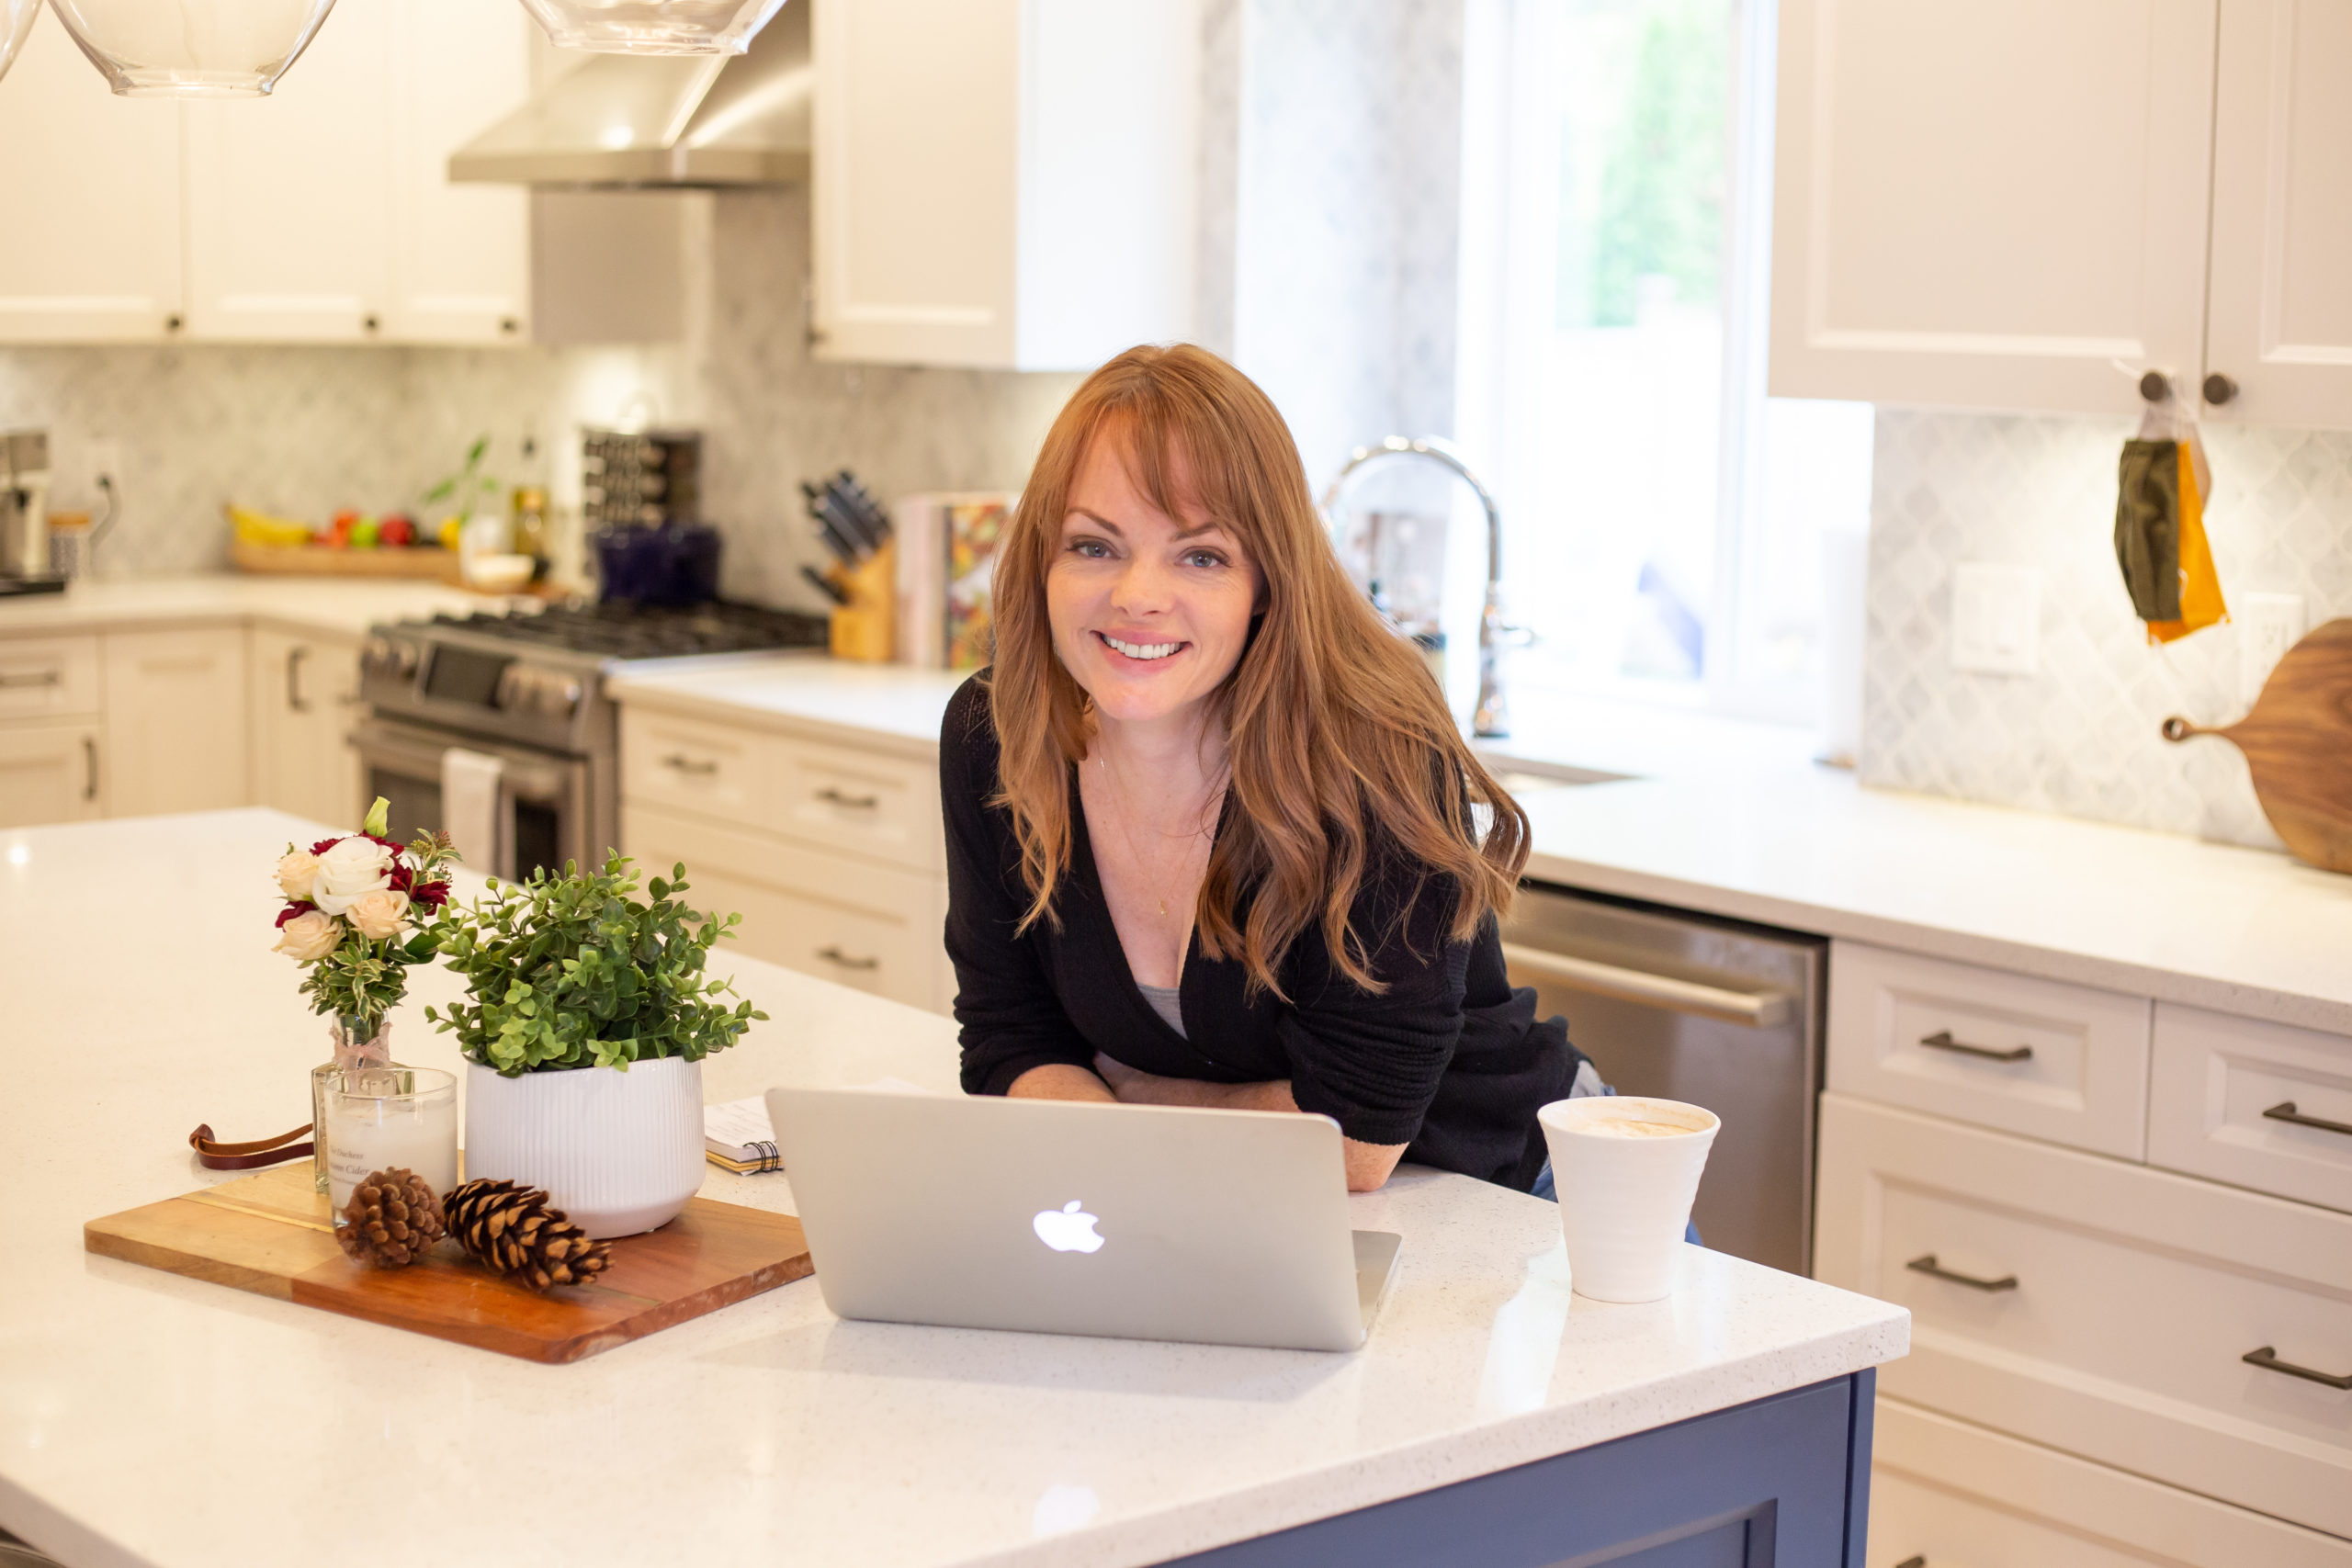 Christine Coughlin leaning on her kitchen island with a laptop in front of her, smiling at the camera